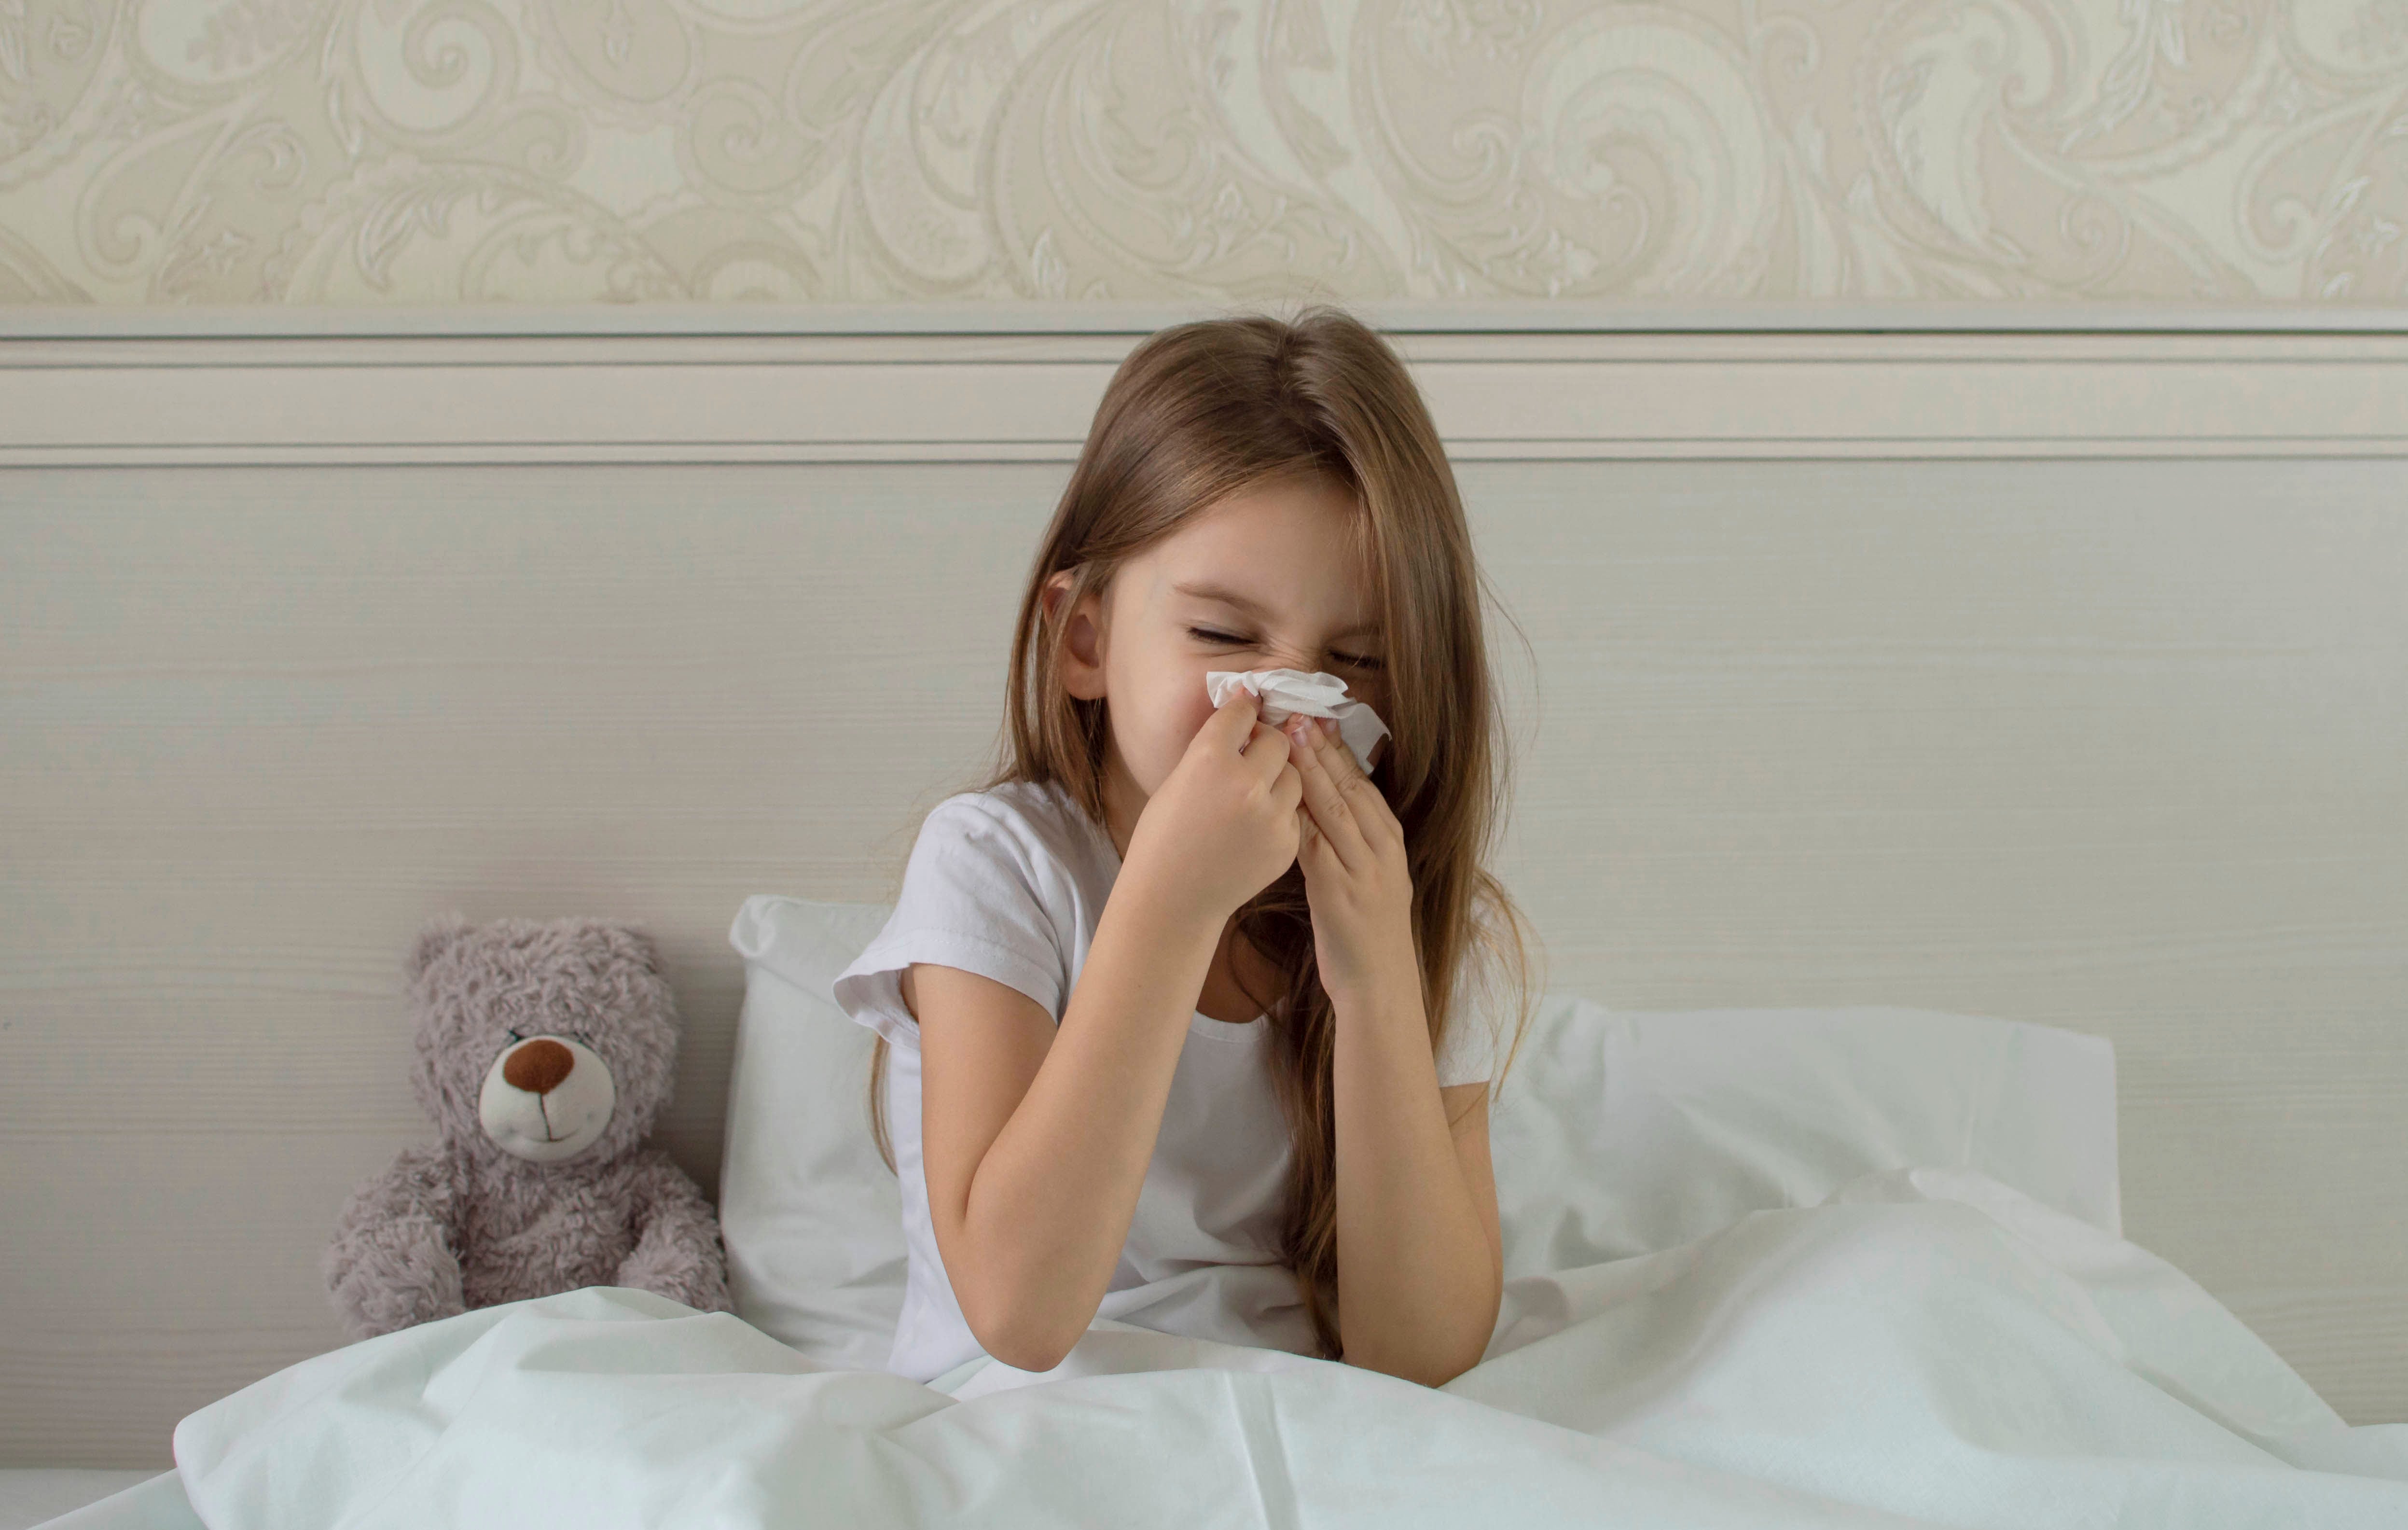 Young girl in bed blowing her nose with a tissue. A teddy bear sits next to her.